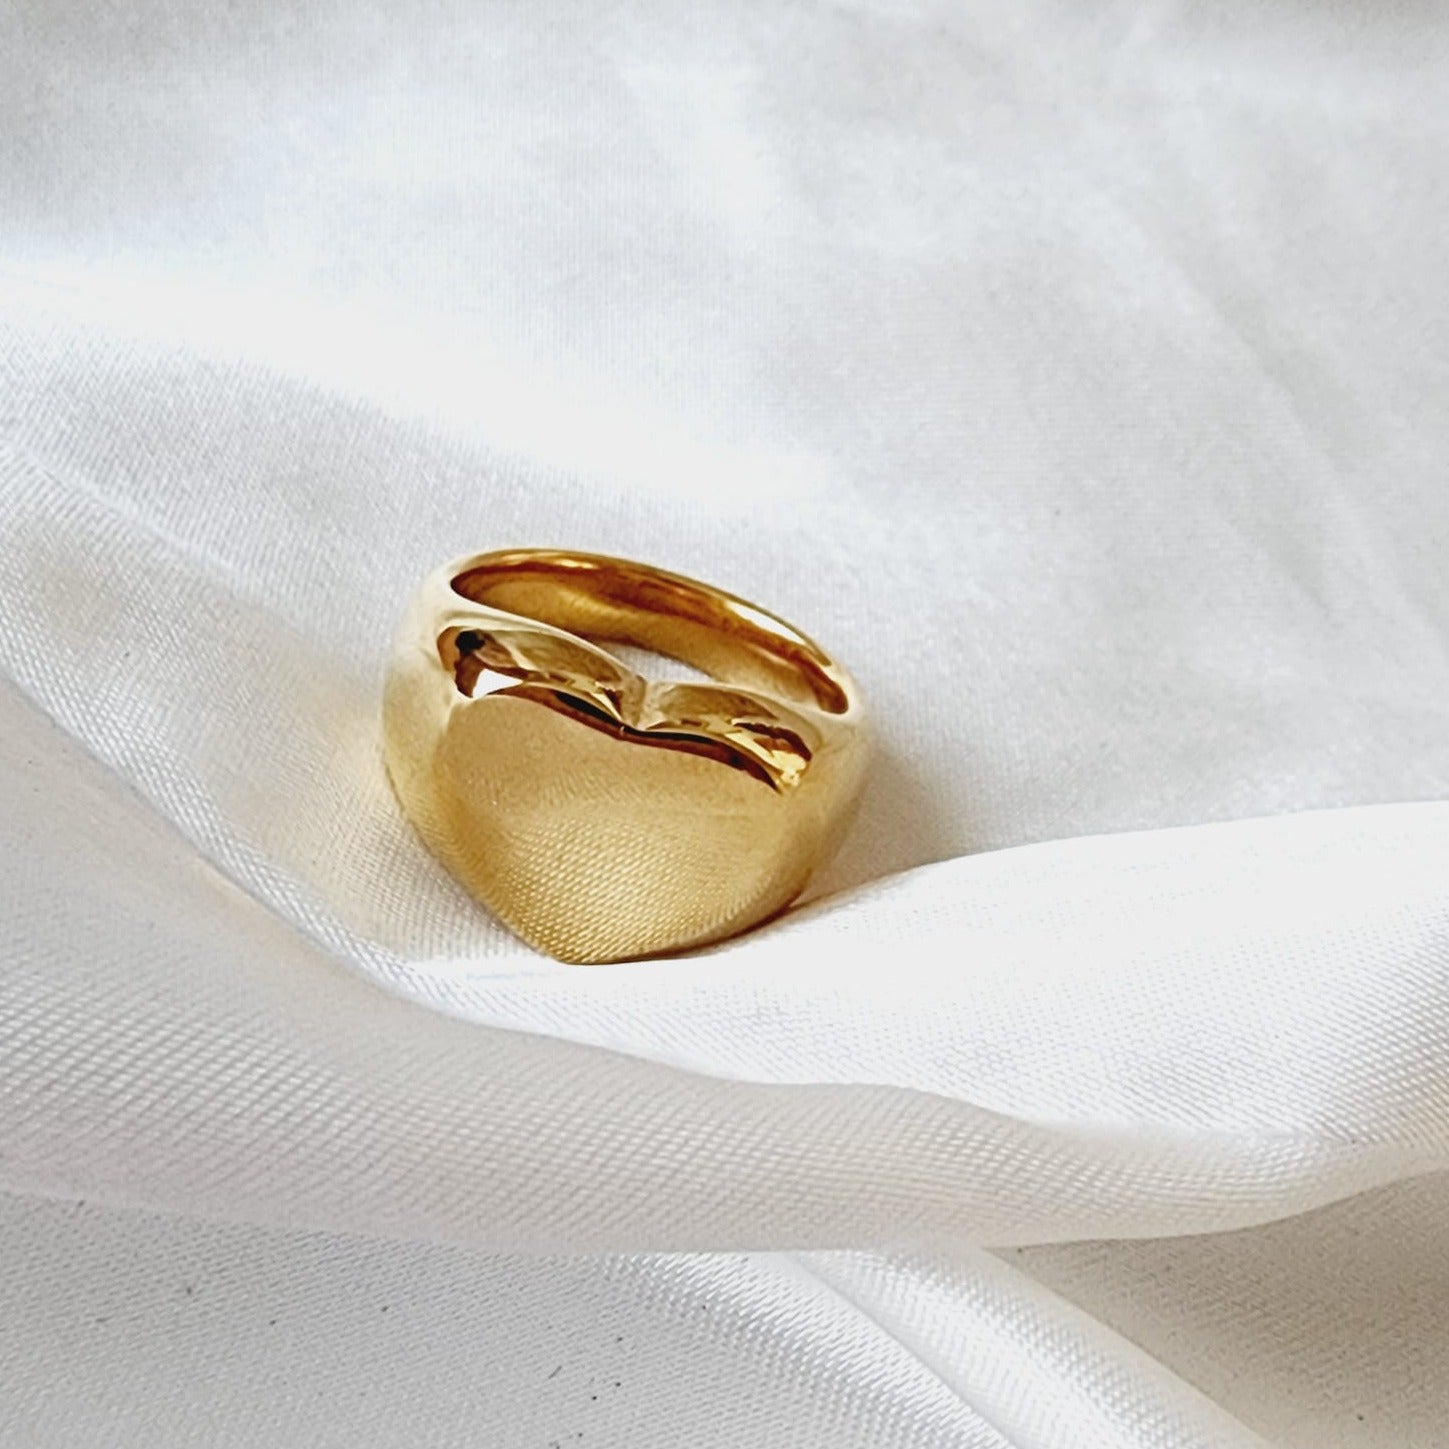 heart ring, chunky heart ring, promise ring, bold heart ring, valentine gift, jewelry gift for valentines, love ring, love jewelry, gift for wife, gift for friend, friendship gifts, self love ring, amor propio anillo, anillo de corazon, waterproof ring, waterproof jewelry, timeless jewelry, timeless ring, gift for girlfriend, soulmate ring, elegant ring, classy ring, dainty ring, everyday ring, must have ring, must have jewelry